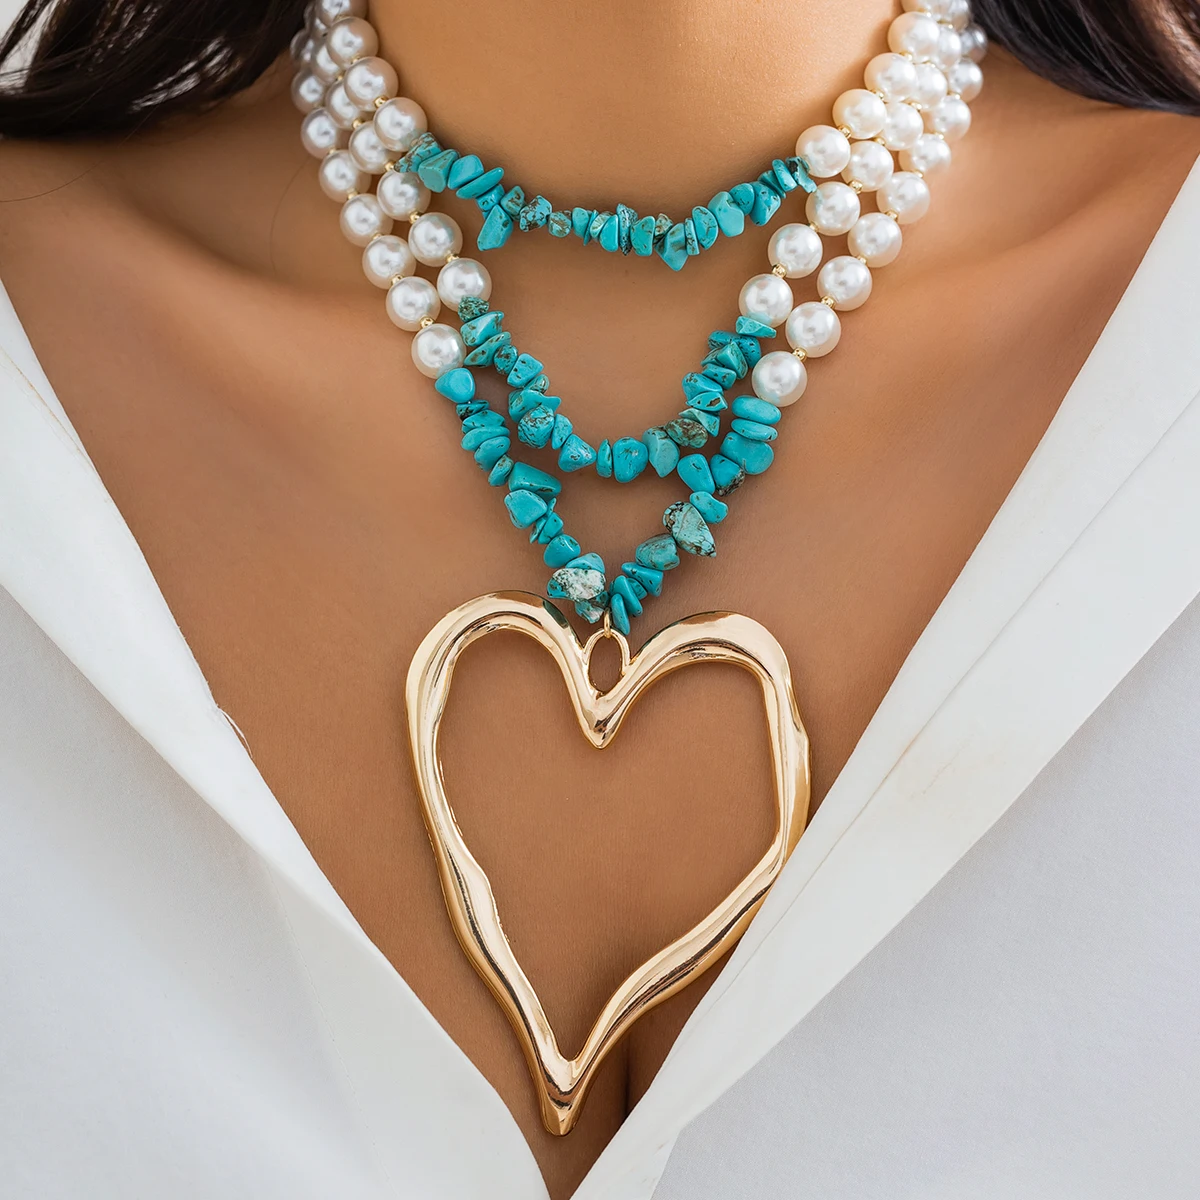 

PuRui Natural Stone Chip Beads Necklace With Irregular Heart Pendant Imitation Pearl Choker Charm Neck Chain Women Party Jewelry